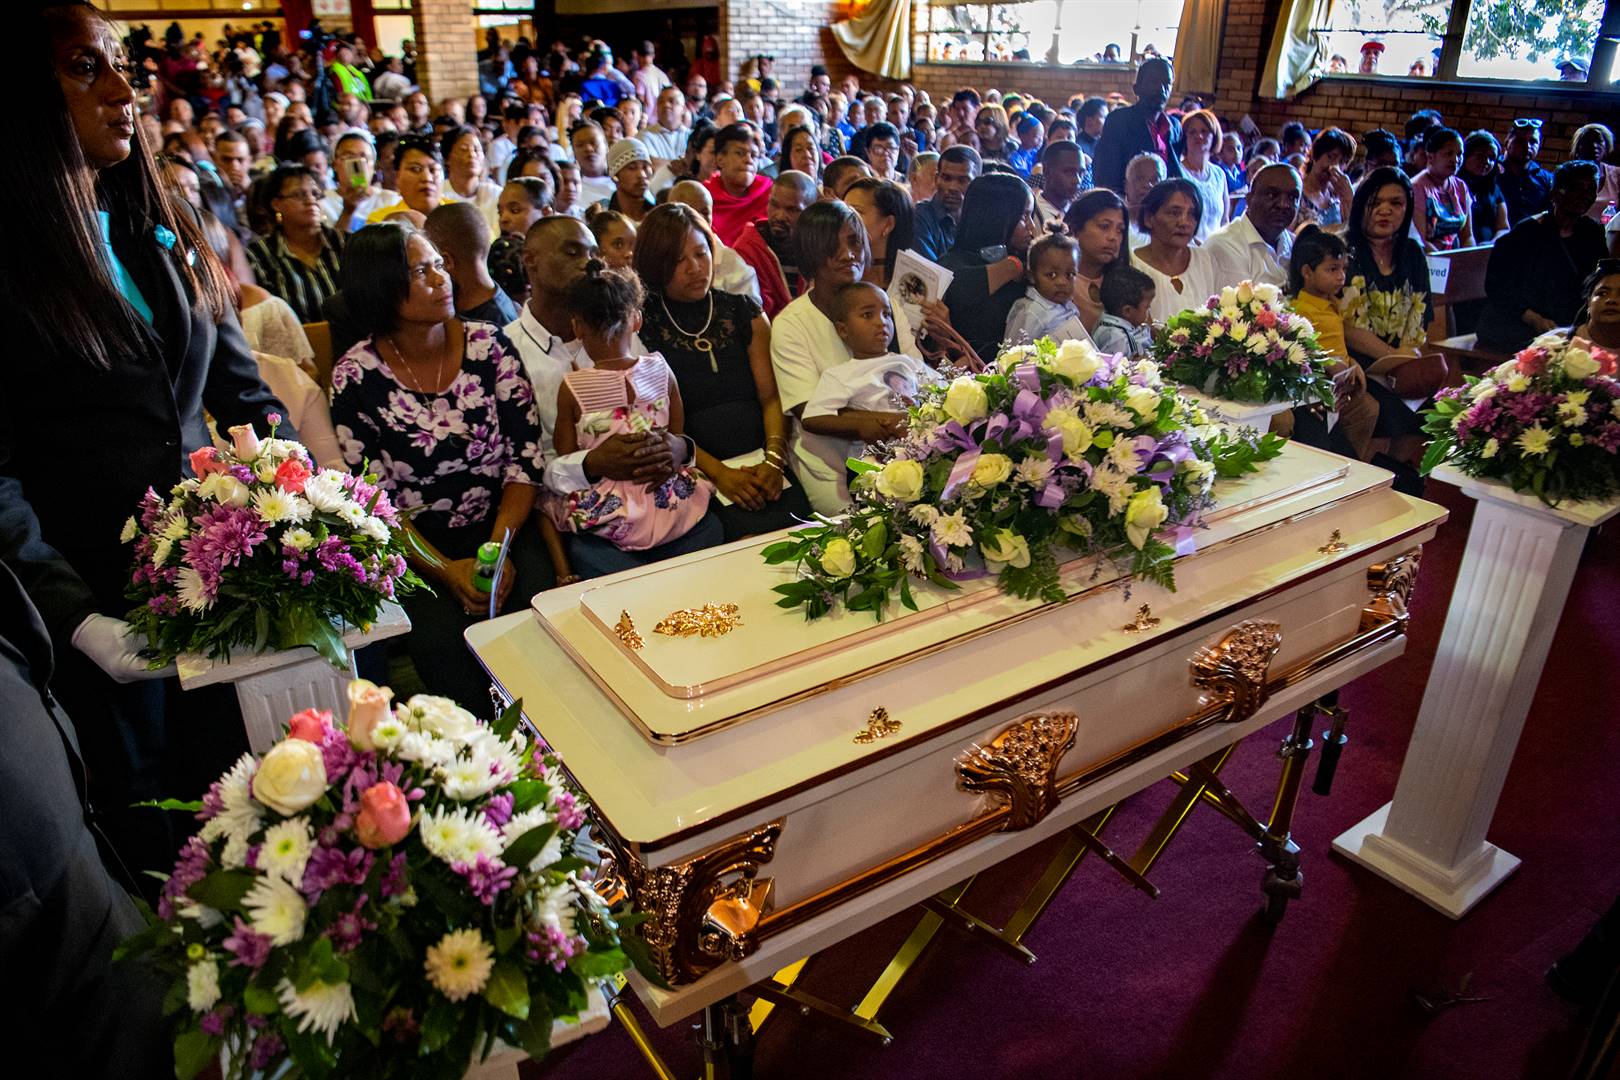 Tazne van Wyk's funeral. The rotten parole system continues to fail the most vulnerable, says the writer. (Jaco Marais, Netwerk24)